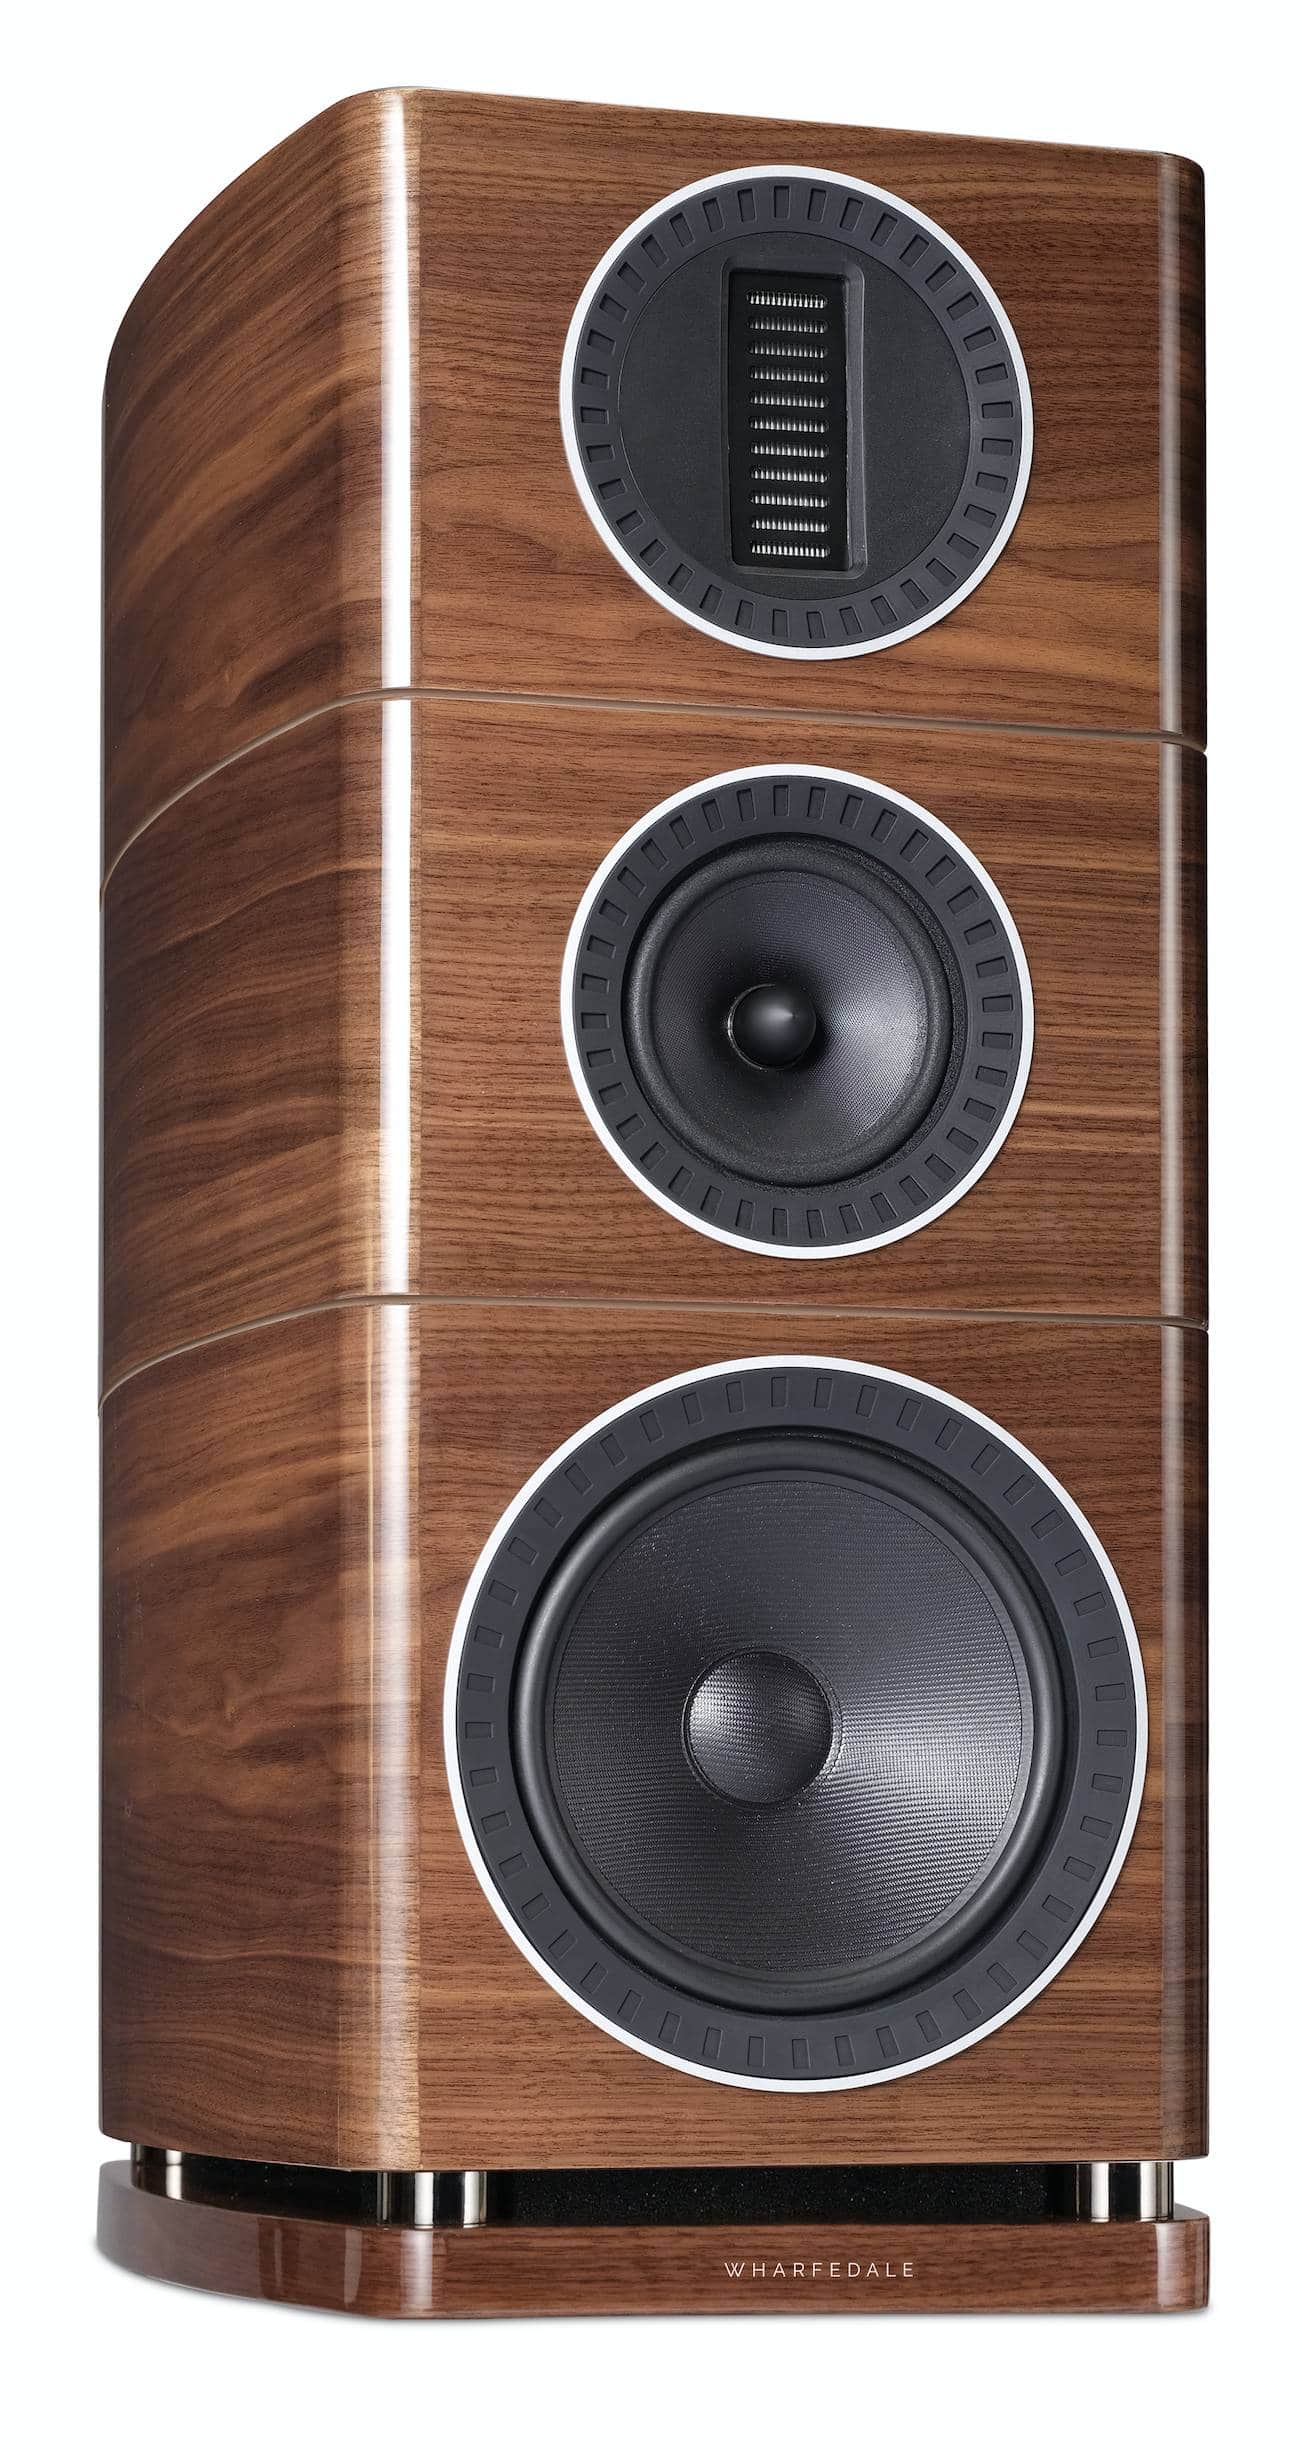 Elysian speakers From Wharfedale